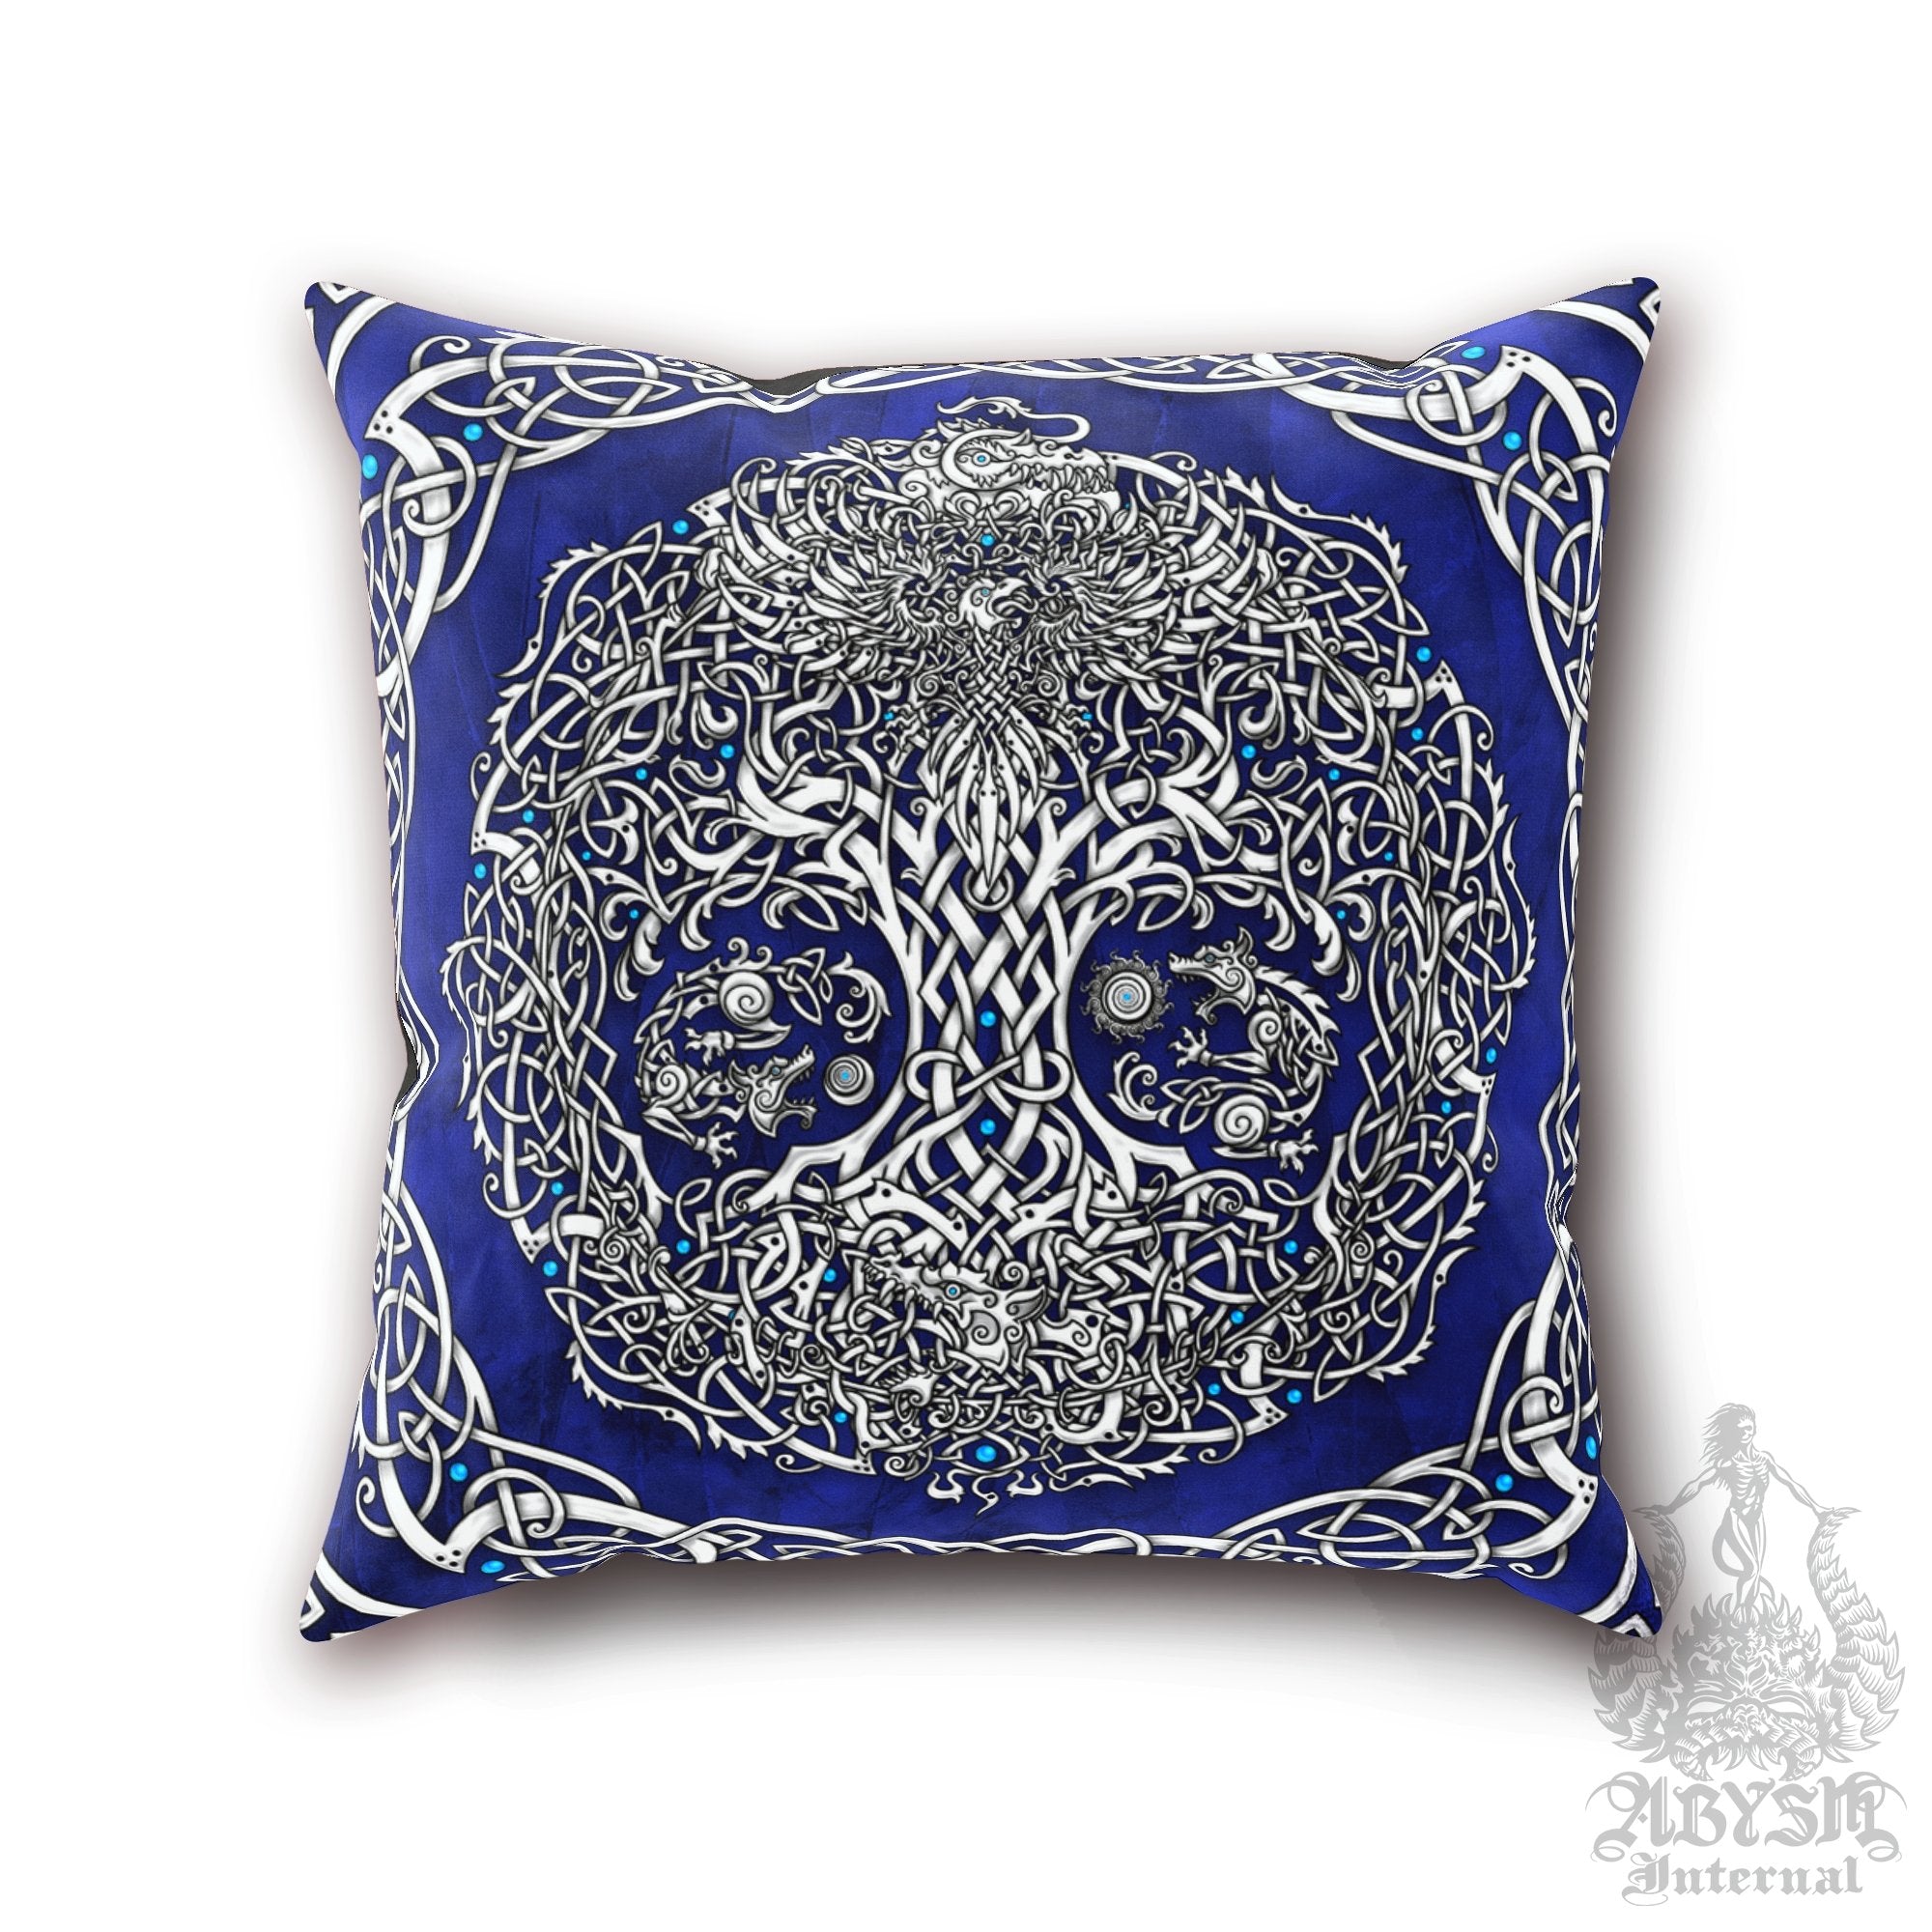 Viking Throw Pillow, Decorative Accent Cushion, Yggdrasil, Norse Decor, Nordic Art, Alternative Home - Tree of Life, White & Blue - Abysm Internal